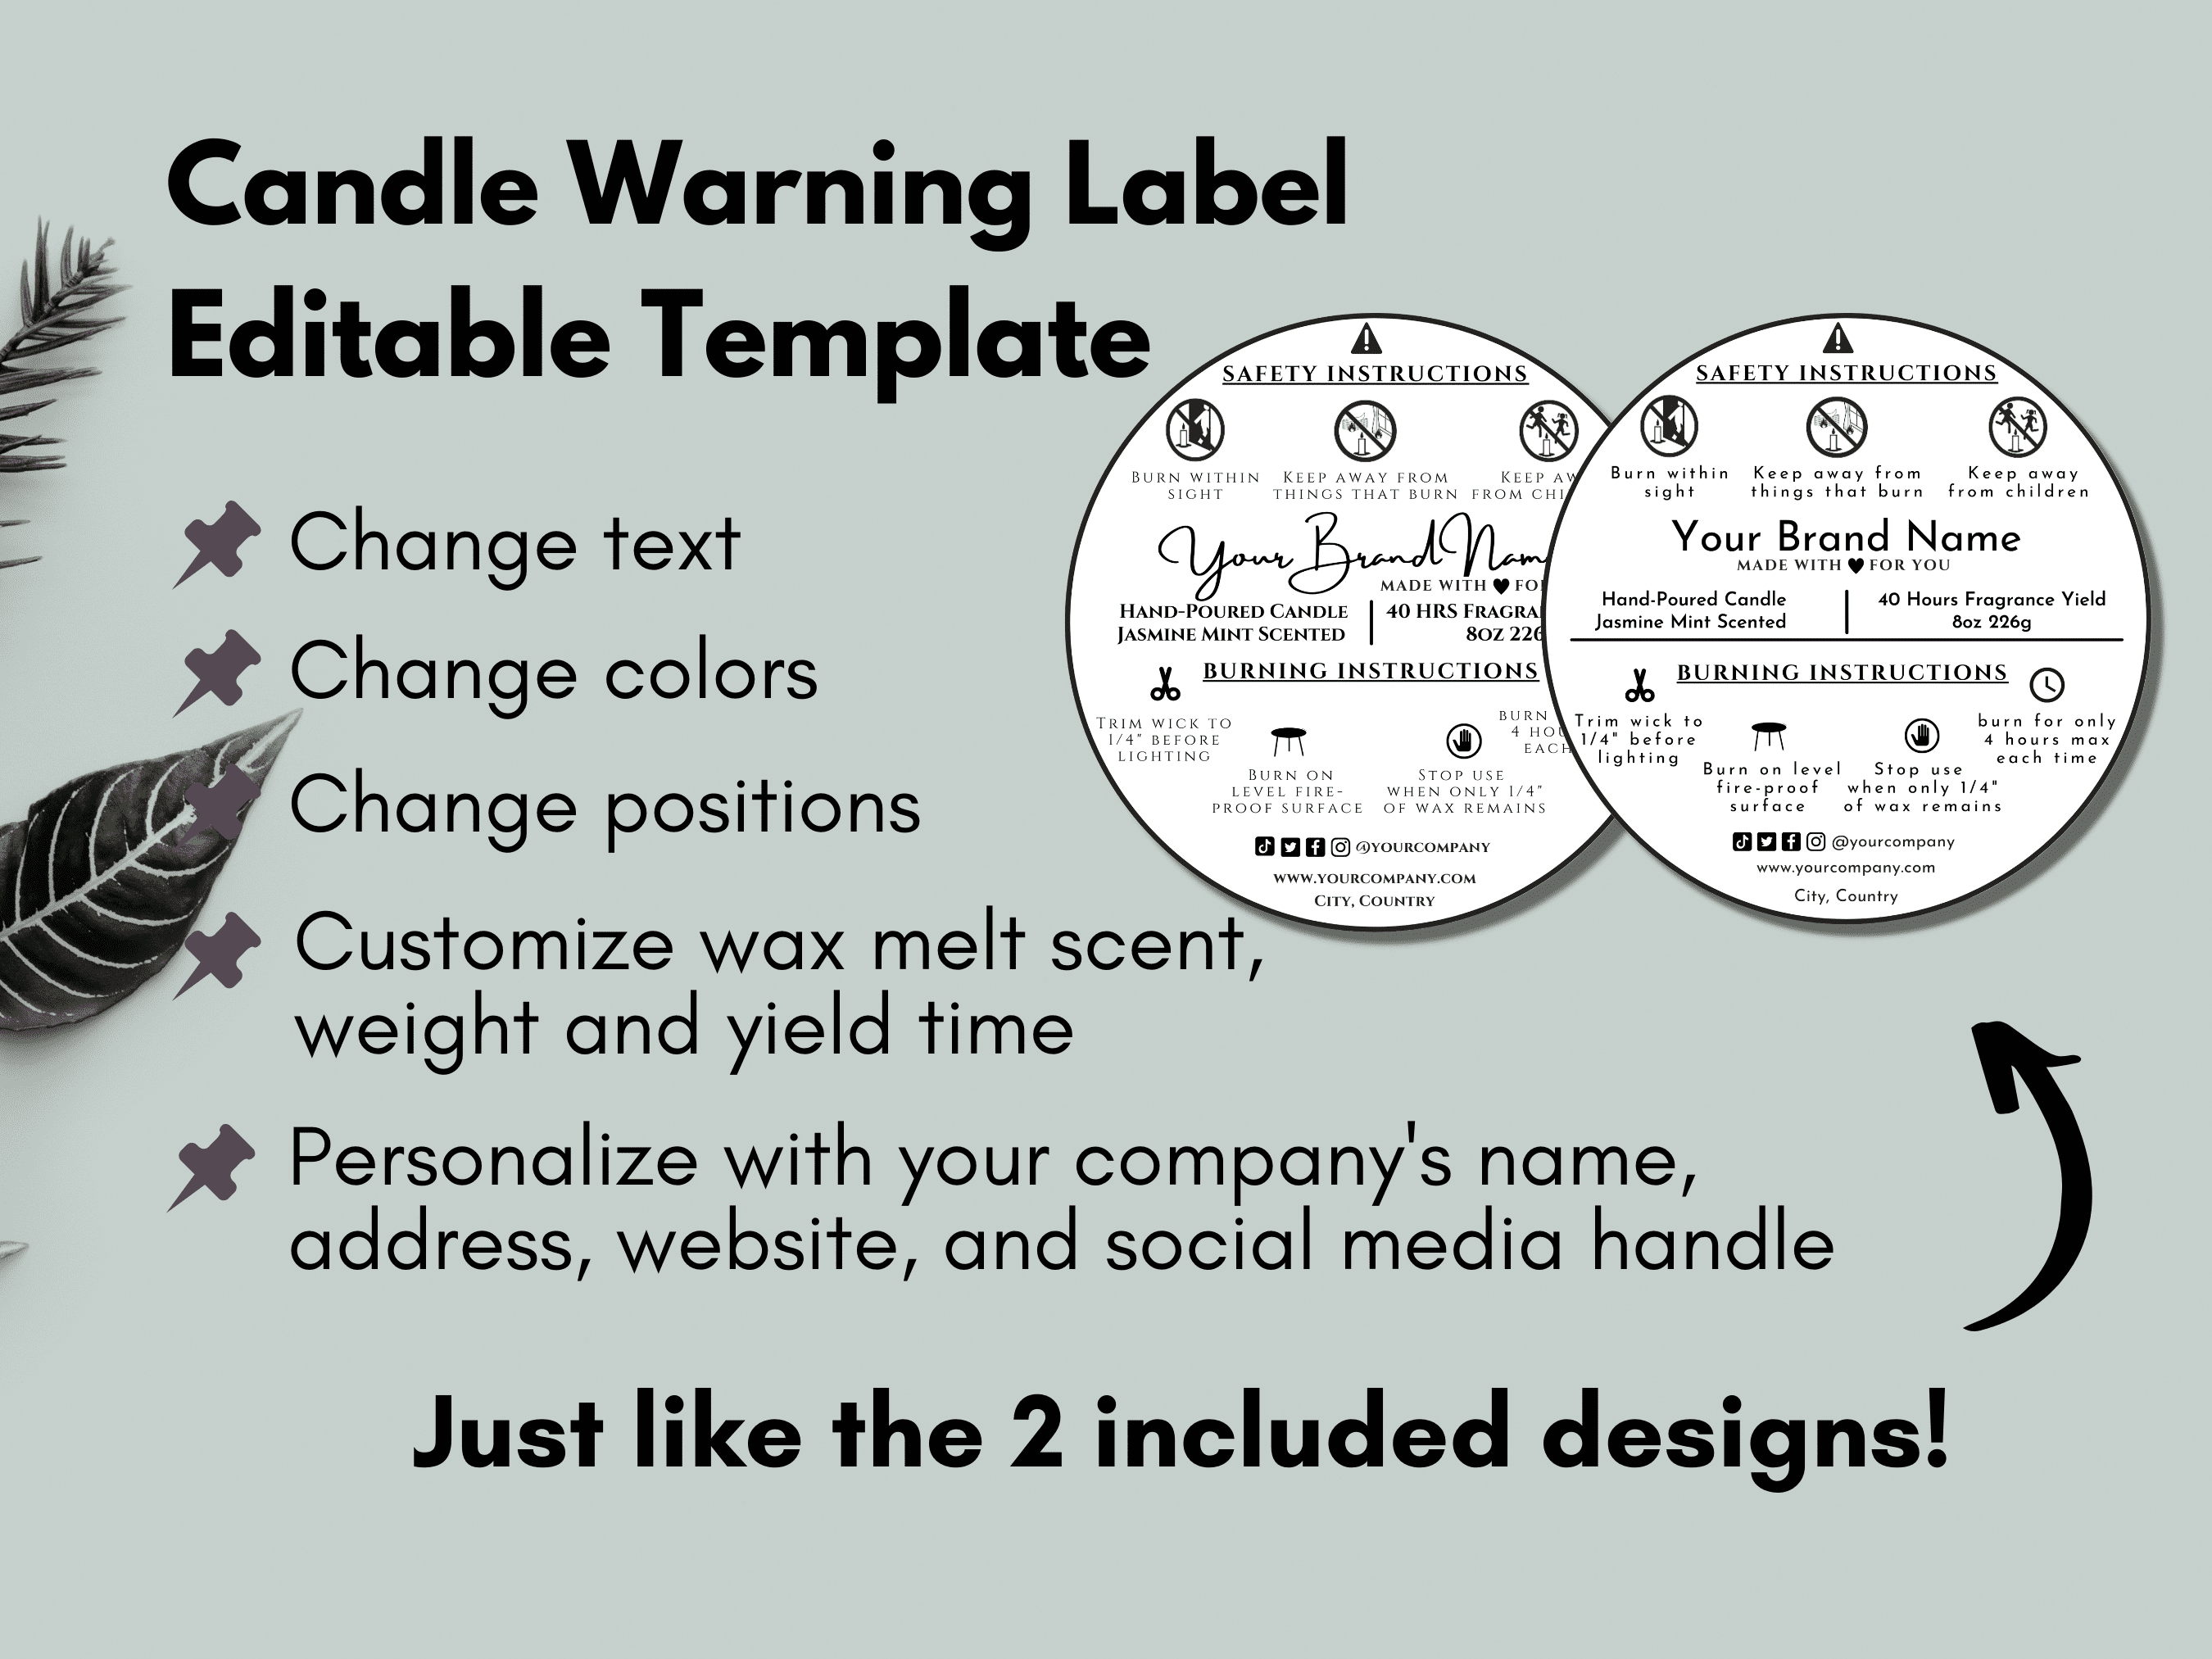 Candle Warning Label Template Editable Candle Safety Label Circle